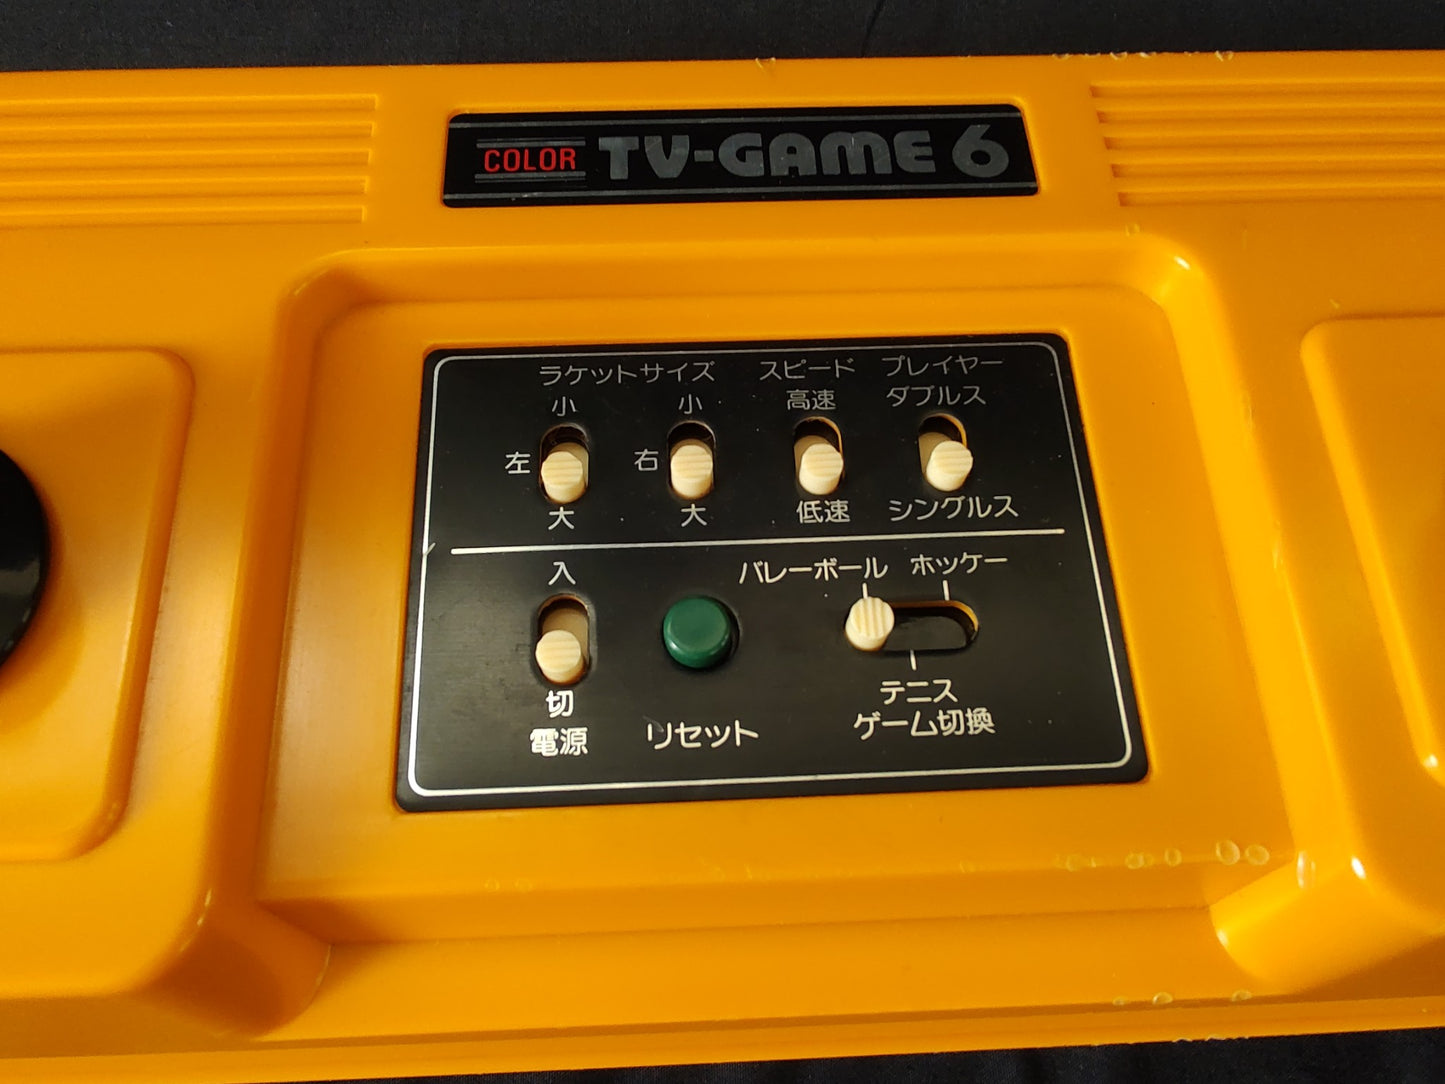 Nintendo TV GAME 6 (CTG-6V) Console, Working-g0115-